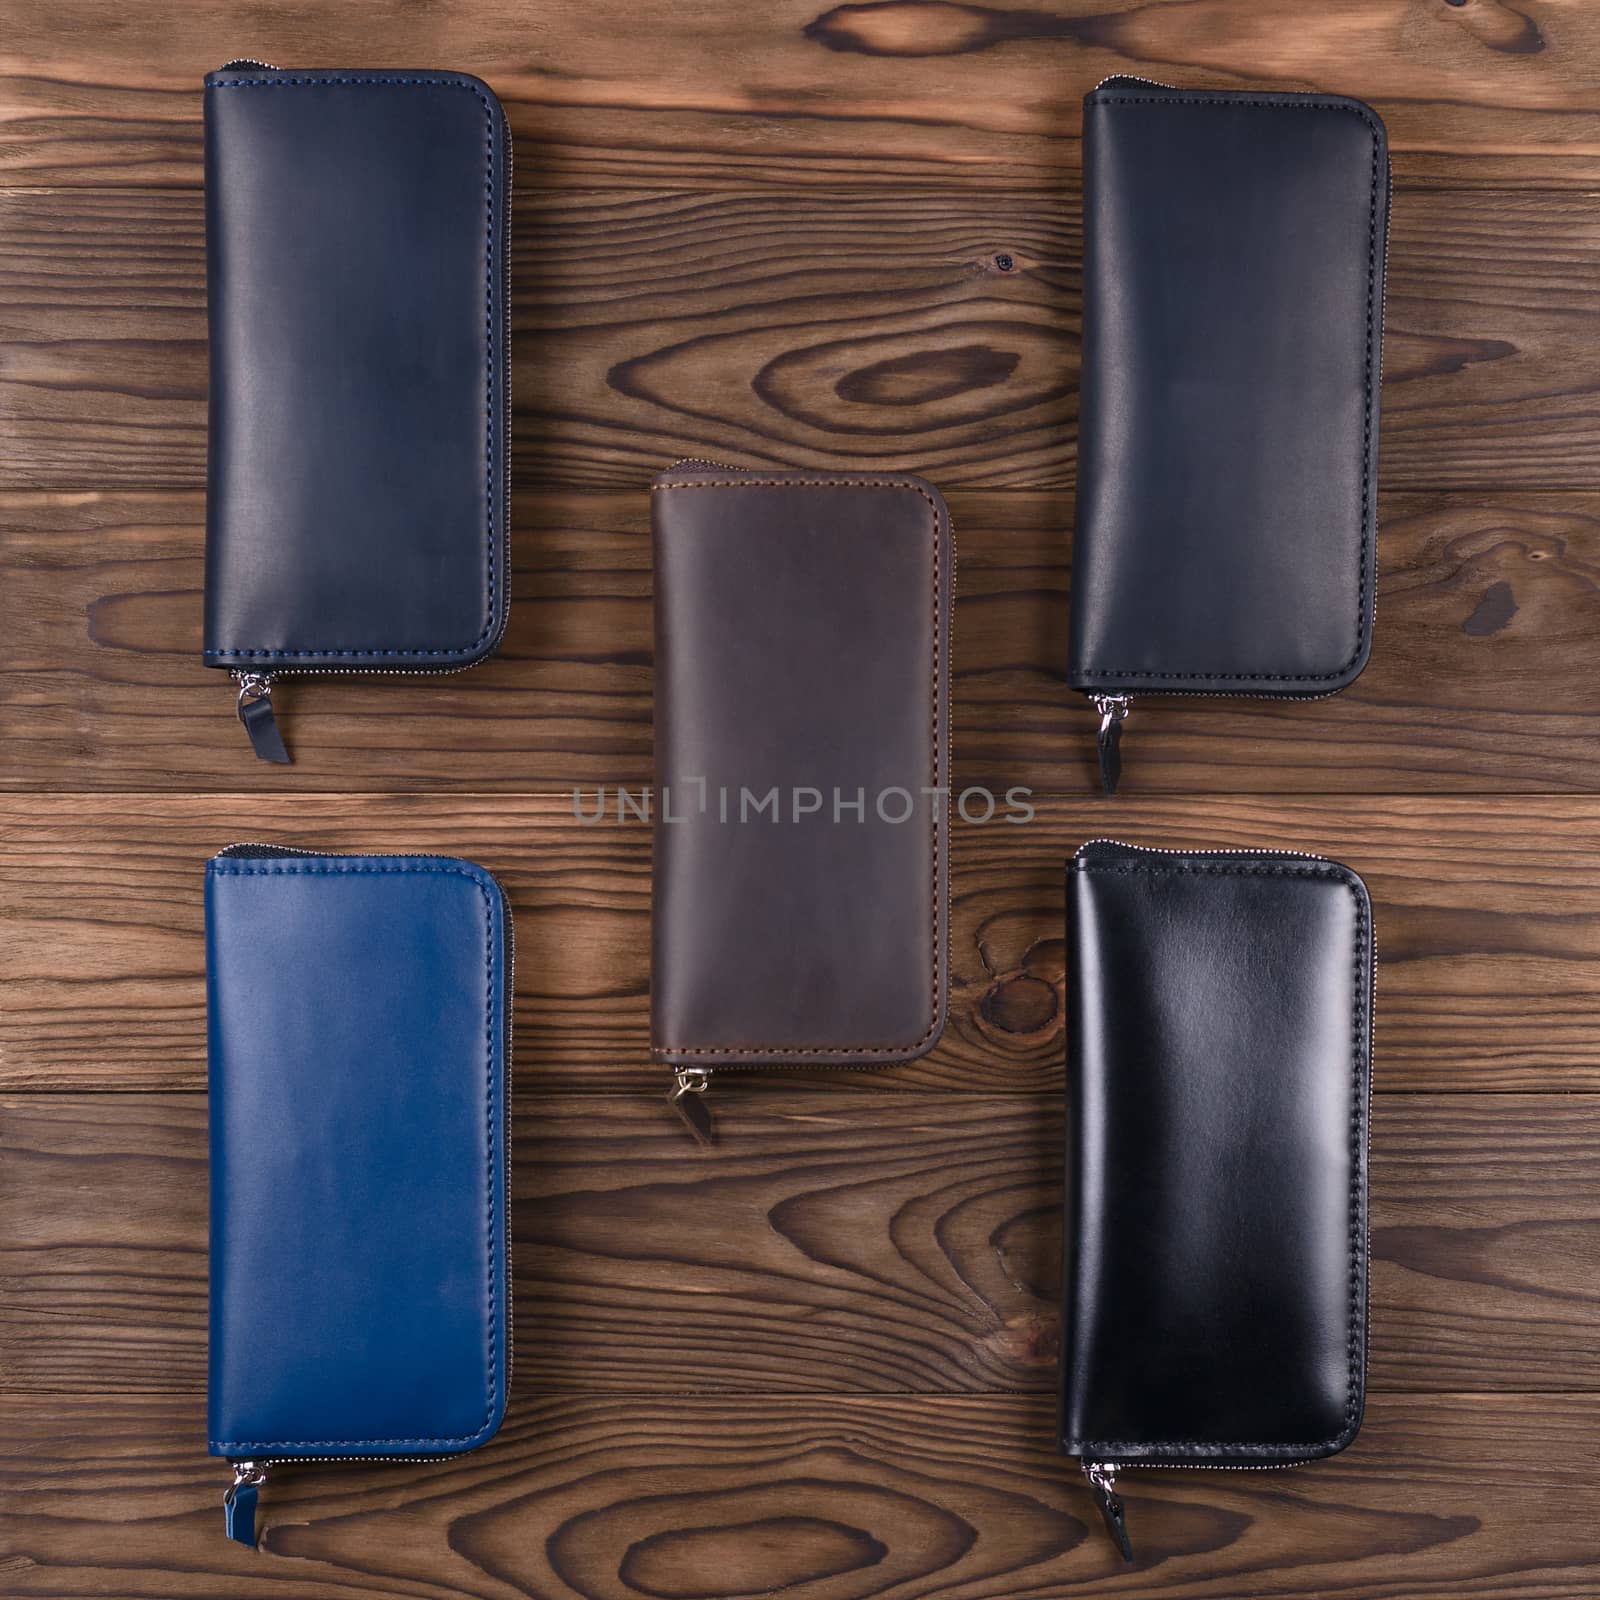 Five handmade leather porte-monnaie on wooden textured background.  Up to down view. Stock photo of luxury accessories.